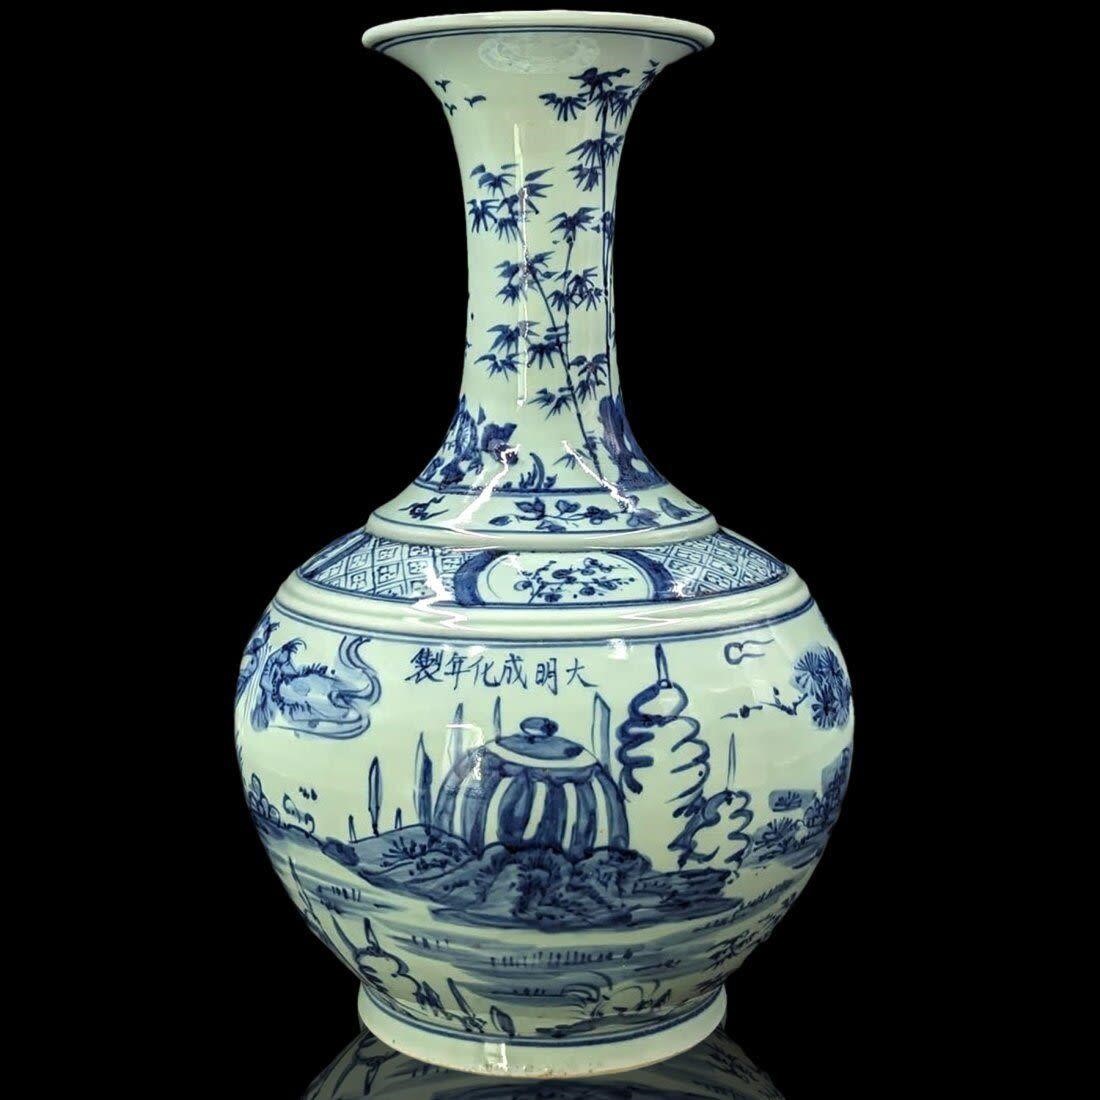 Chinese Blue And White Scenic Porcelain Vase With